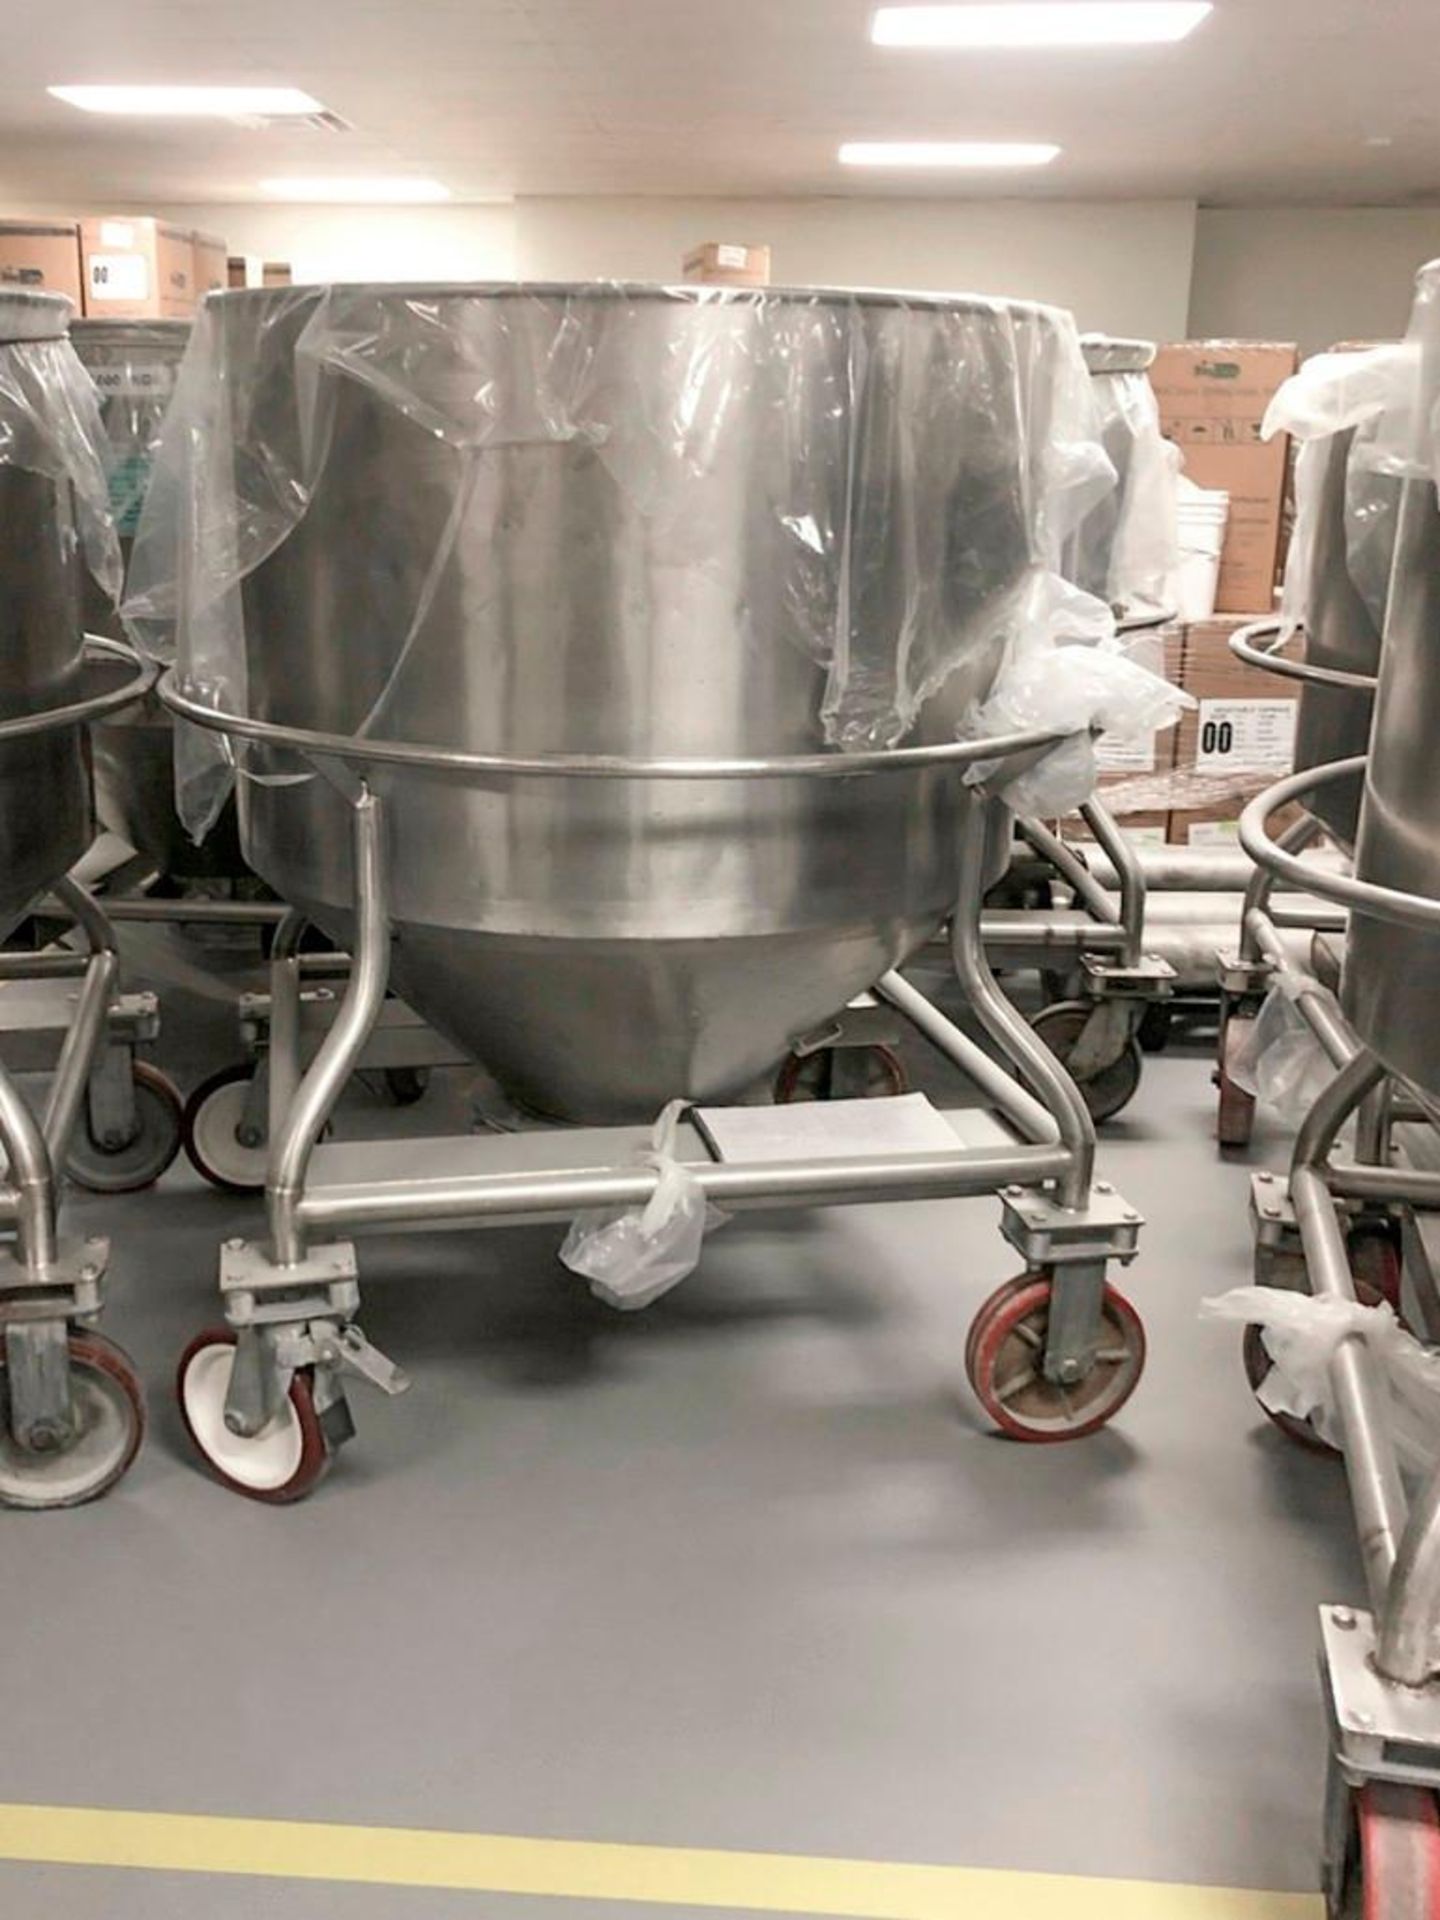 700Kg Capacity Charge Kettle - Image 11 of 12